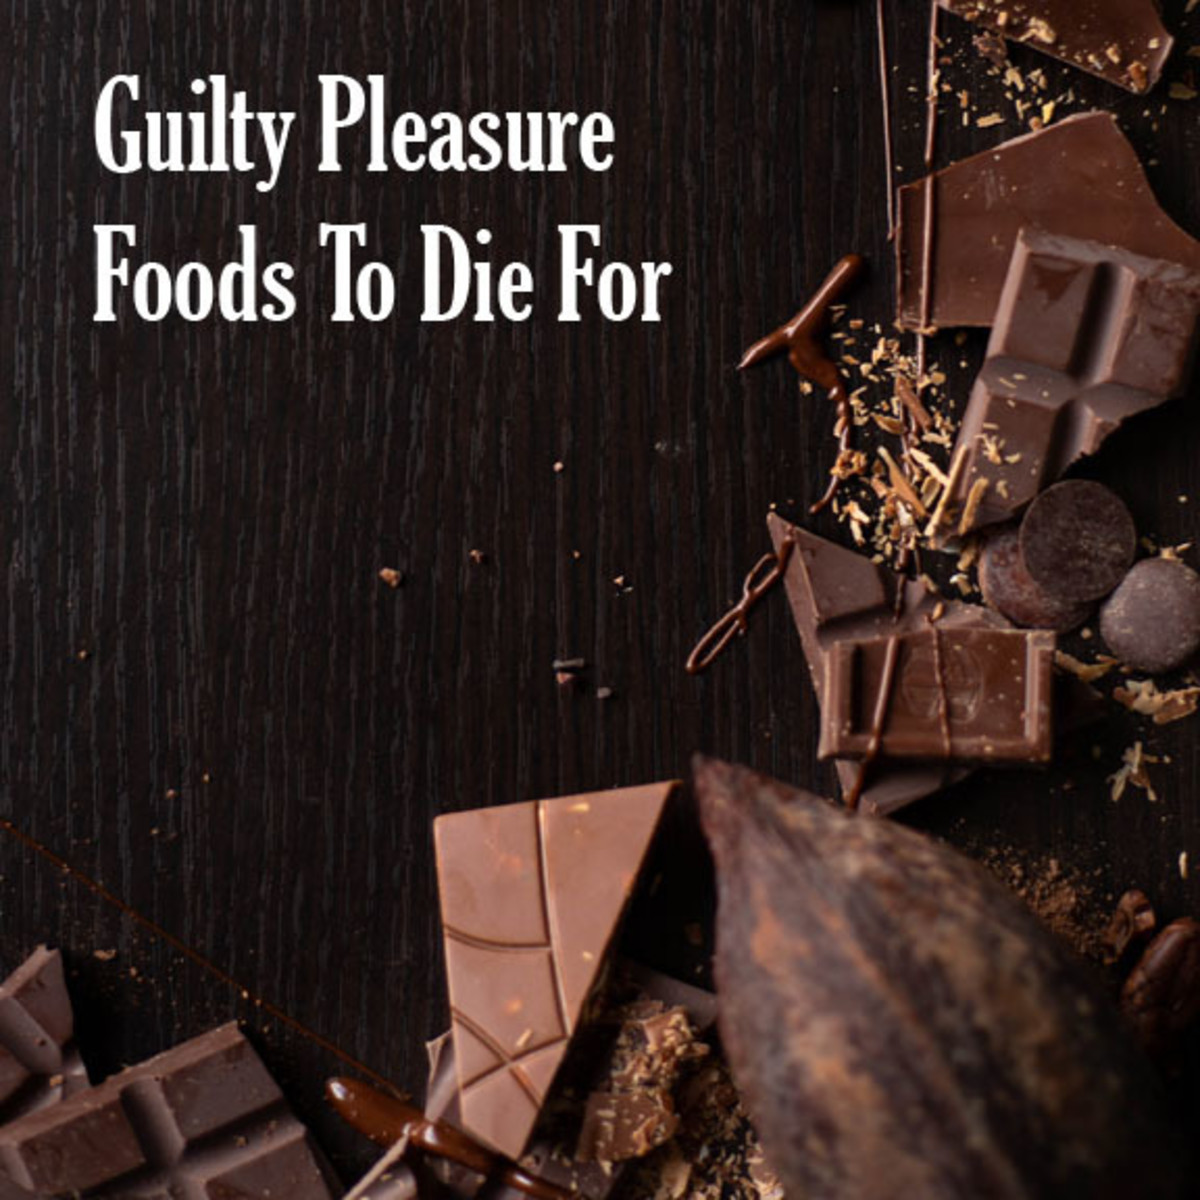 Guilty Pleasure Snacks and Treats to Make You Feel Better